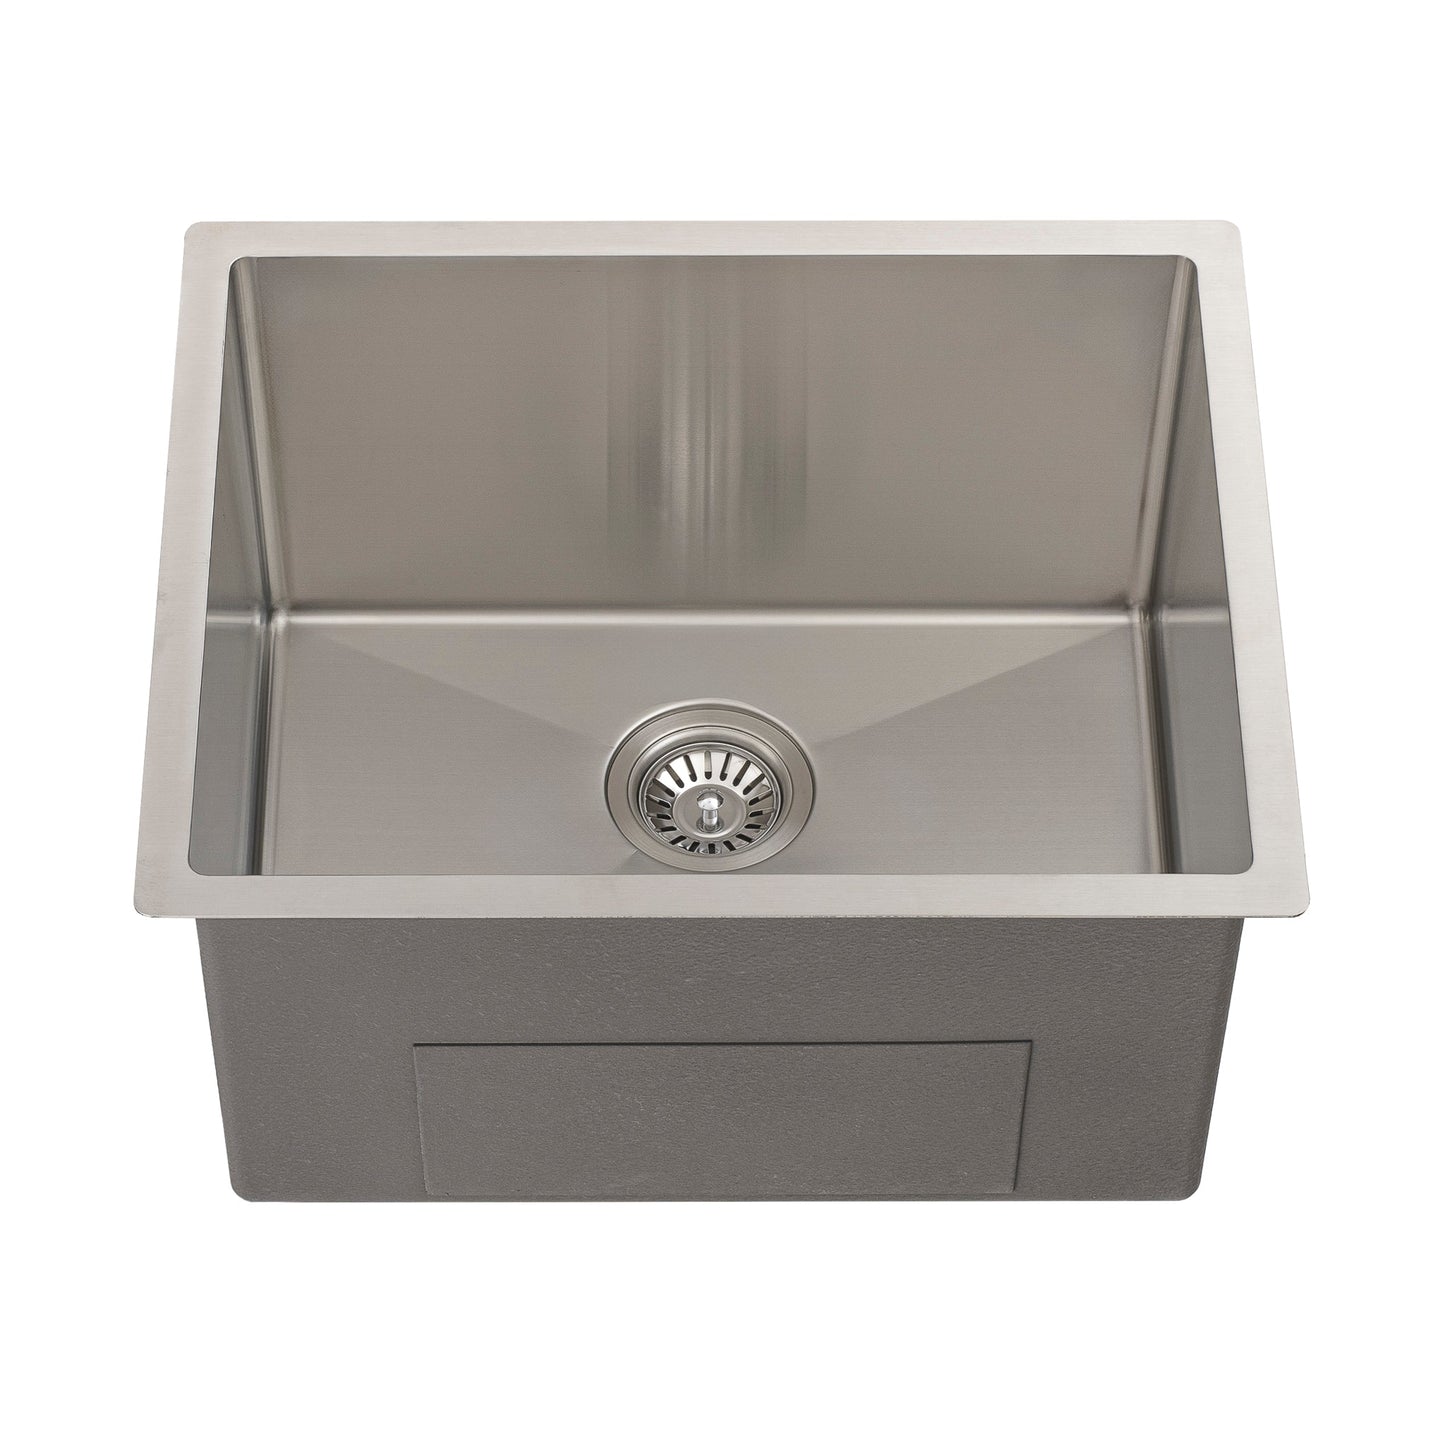 Retto II 550mm x 450mm x 300mm Extra Height Stainless Steel Sink, Brushed Nickel Silver